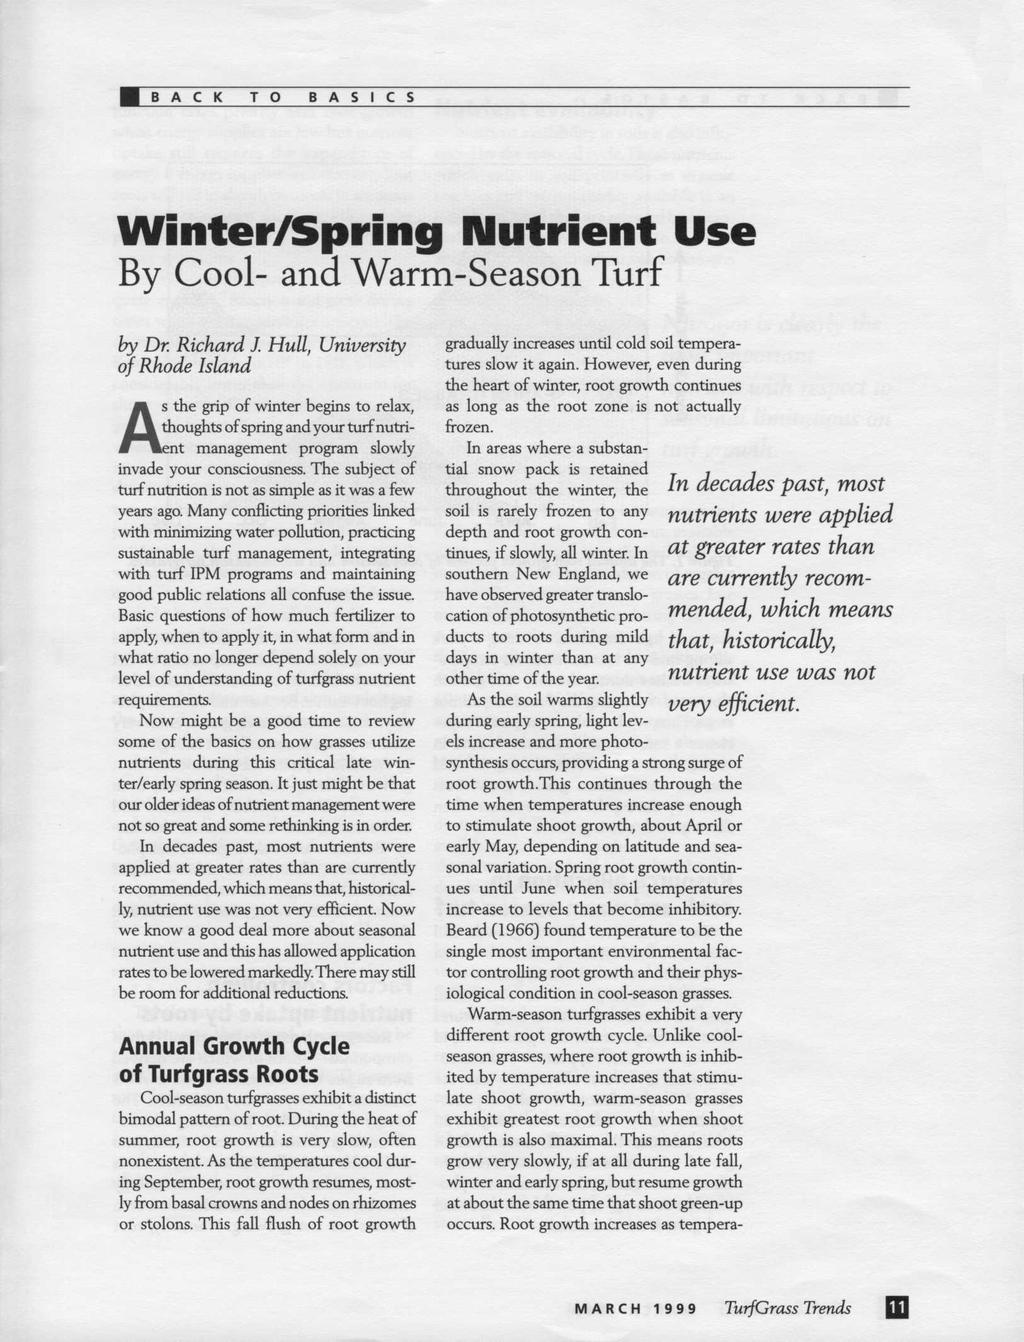 B A C K TO B A S I C S Winter/Spring Nutrient Use By Cool- and Warm-Season Turf by Dr. Richard J.